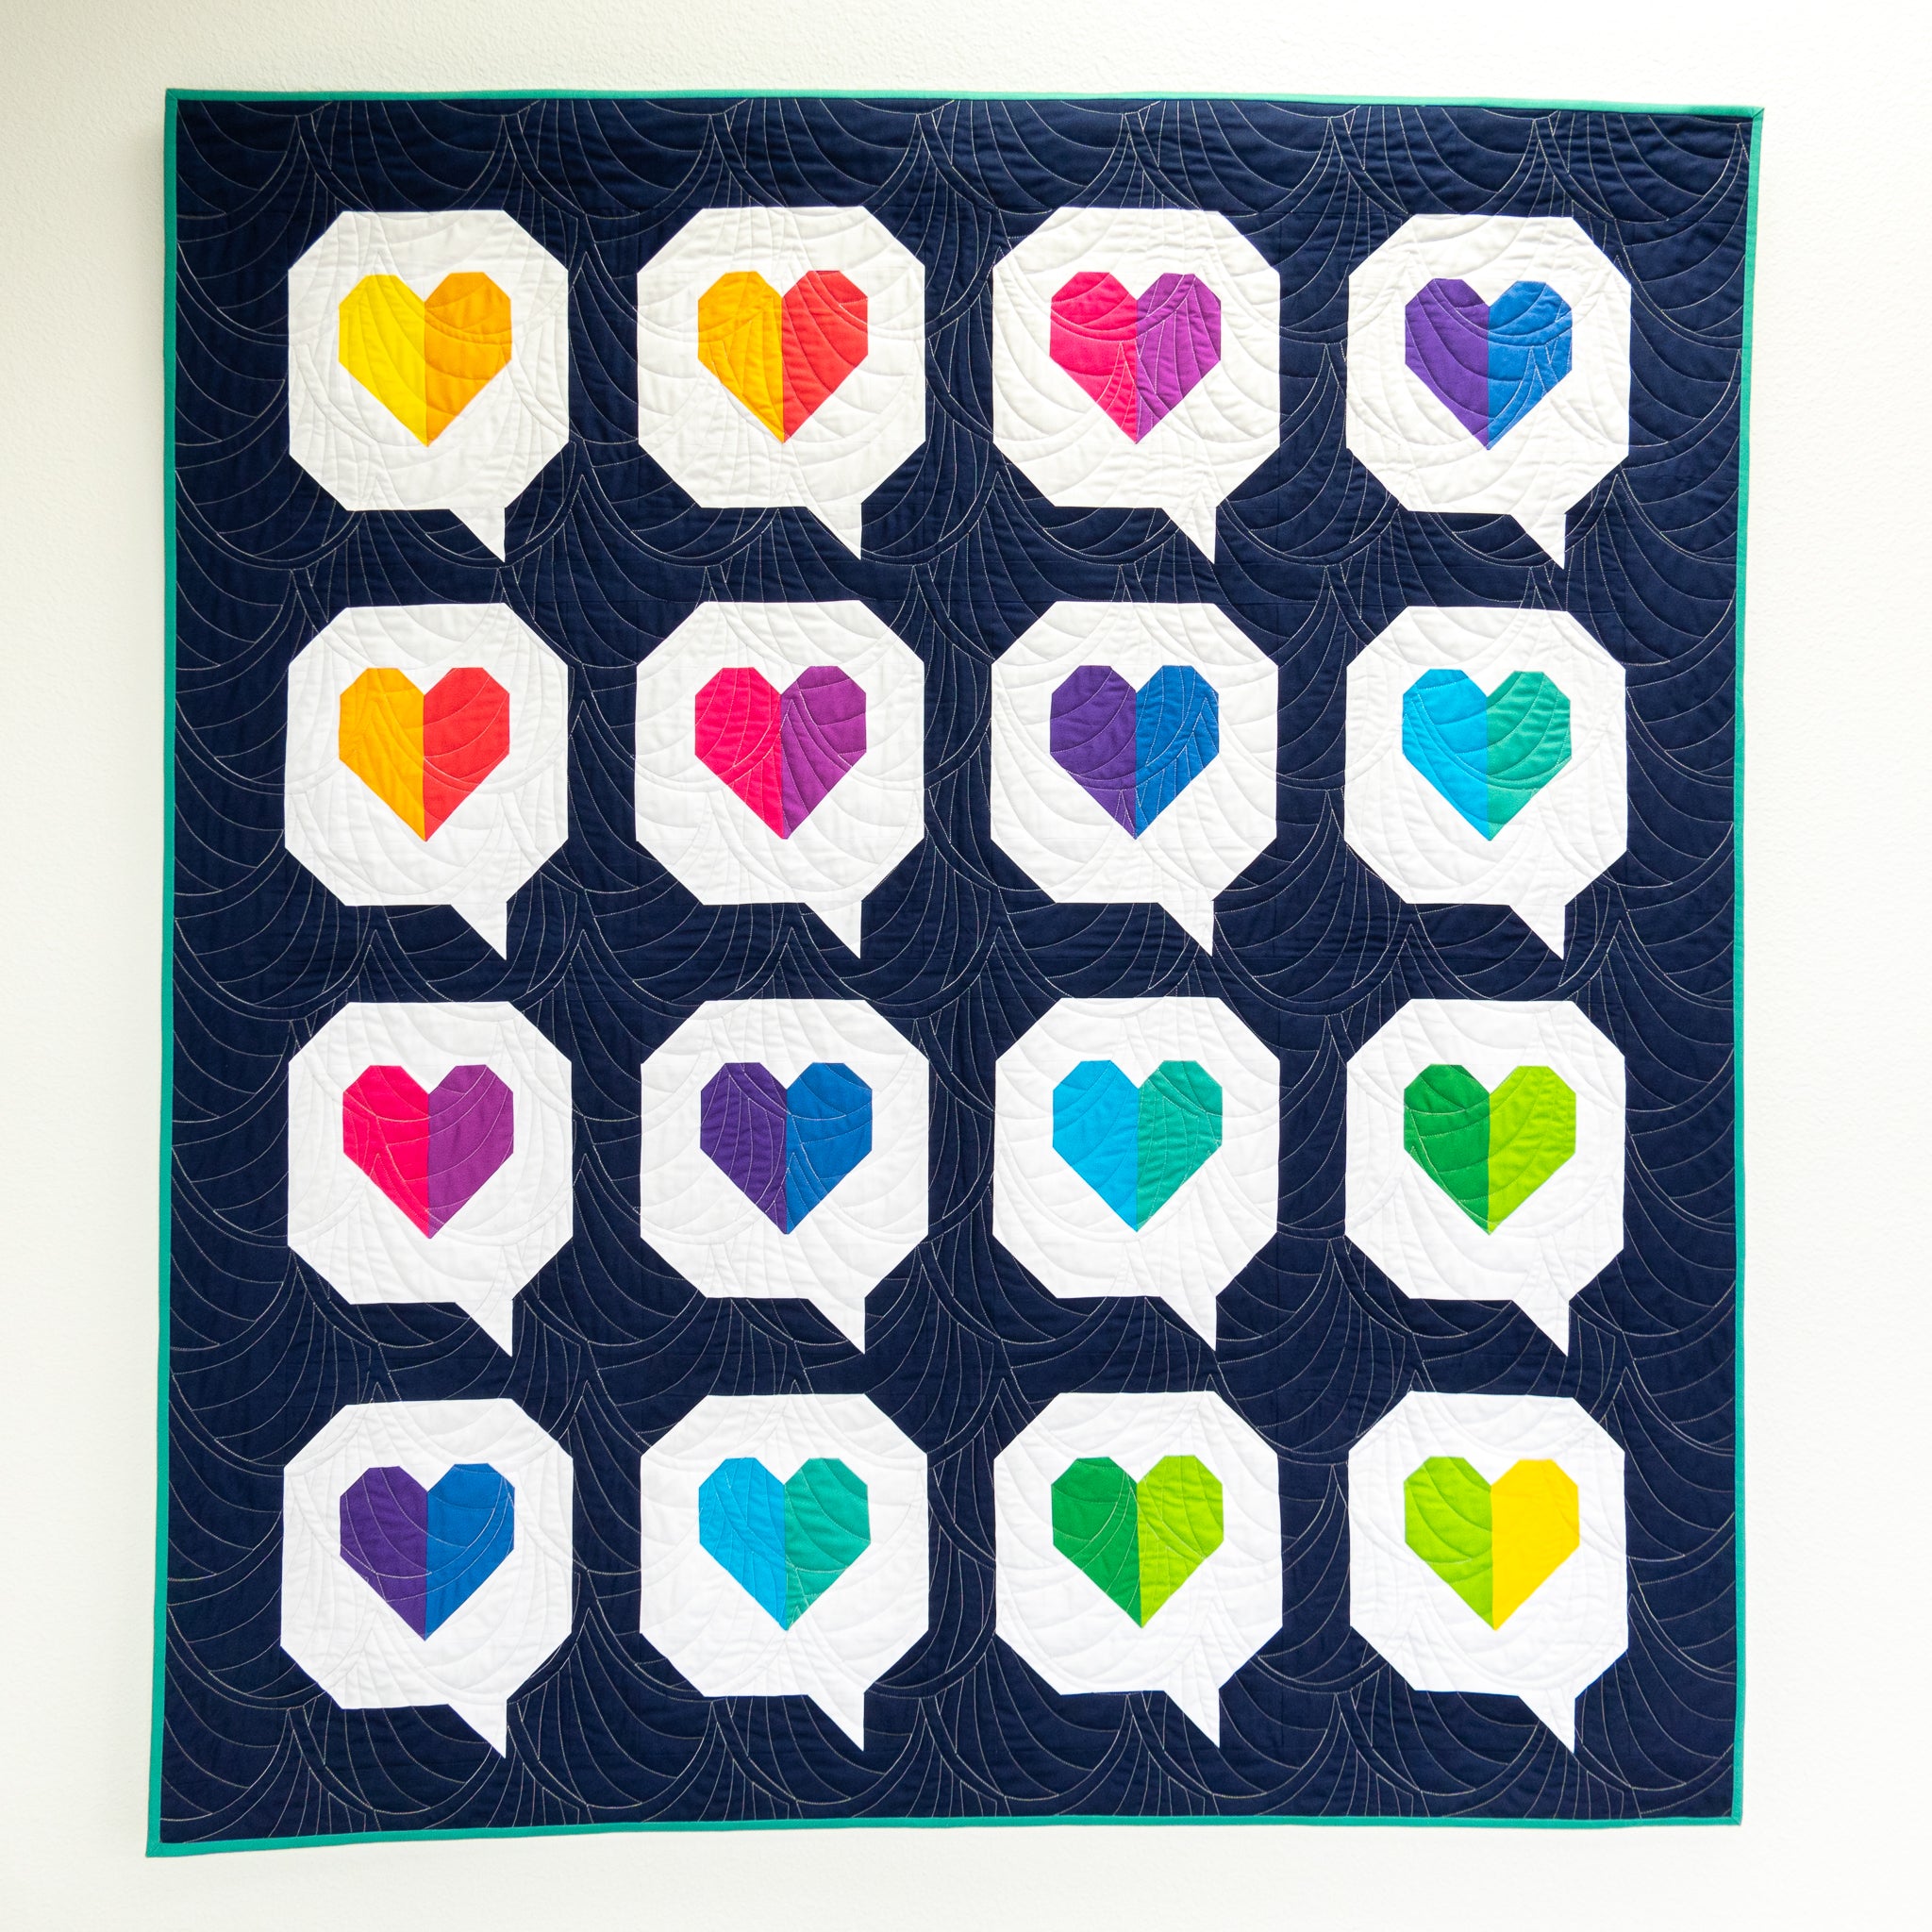 I Heart You quilt in rainbow solids - Sewfinity